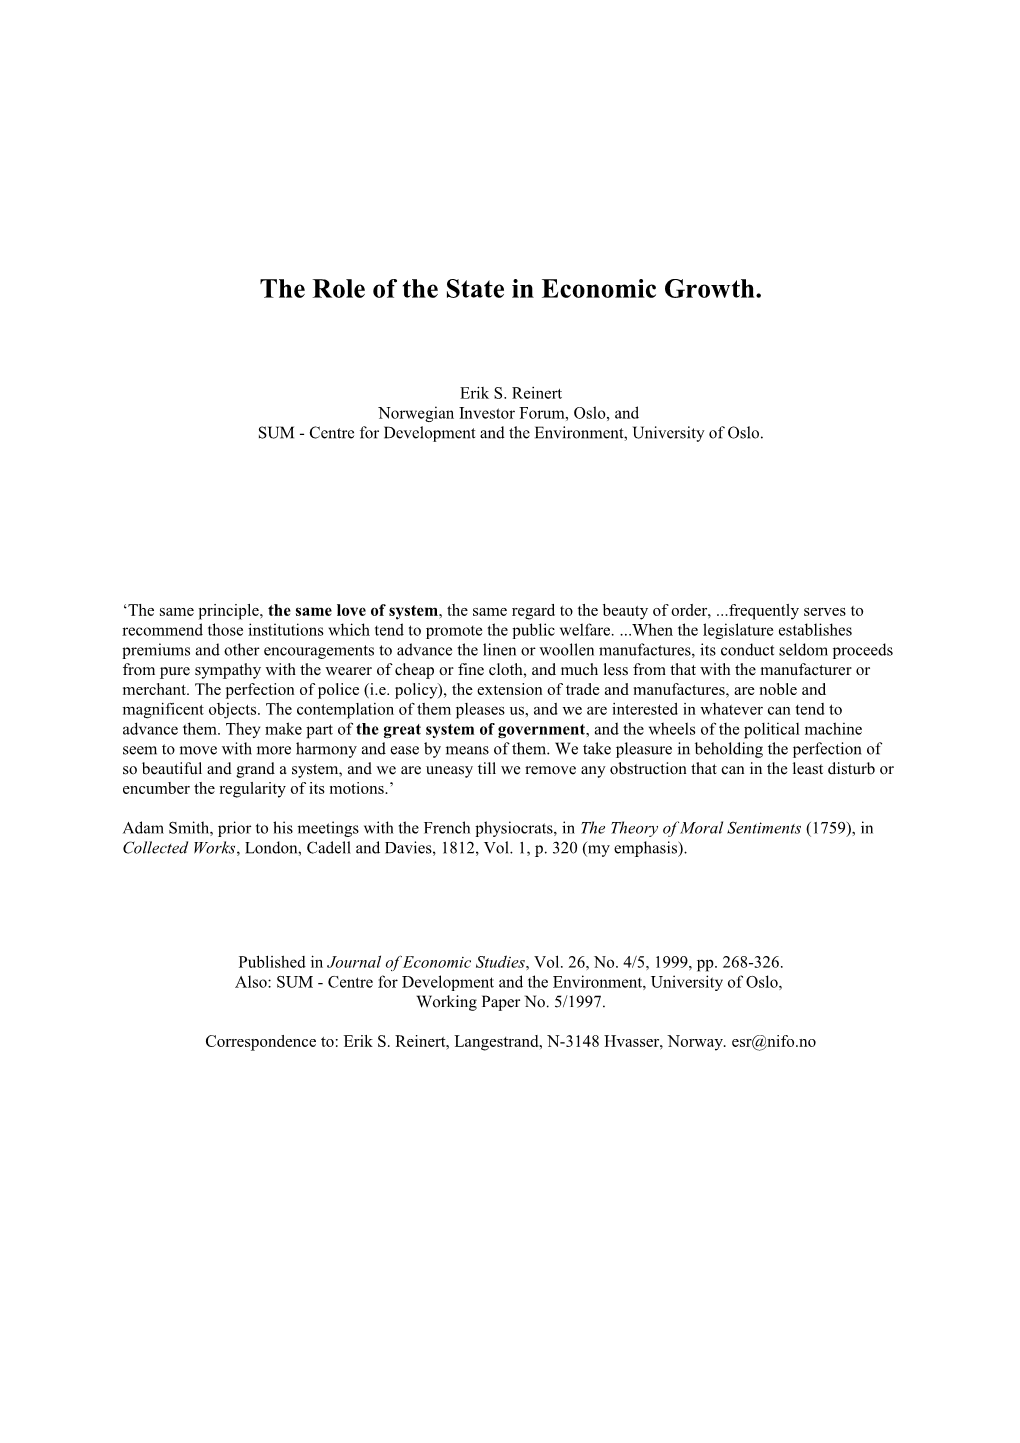 The Role of the State in Economic Growth